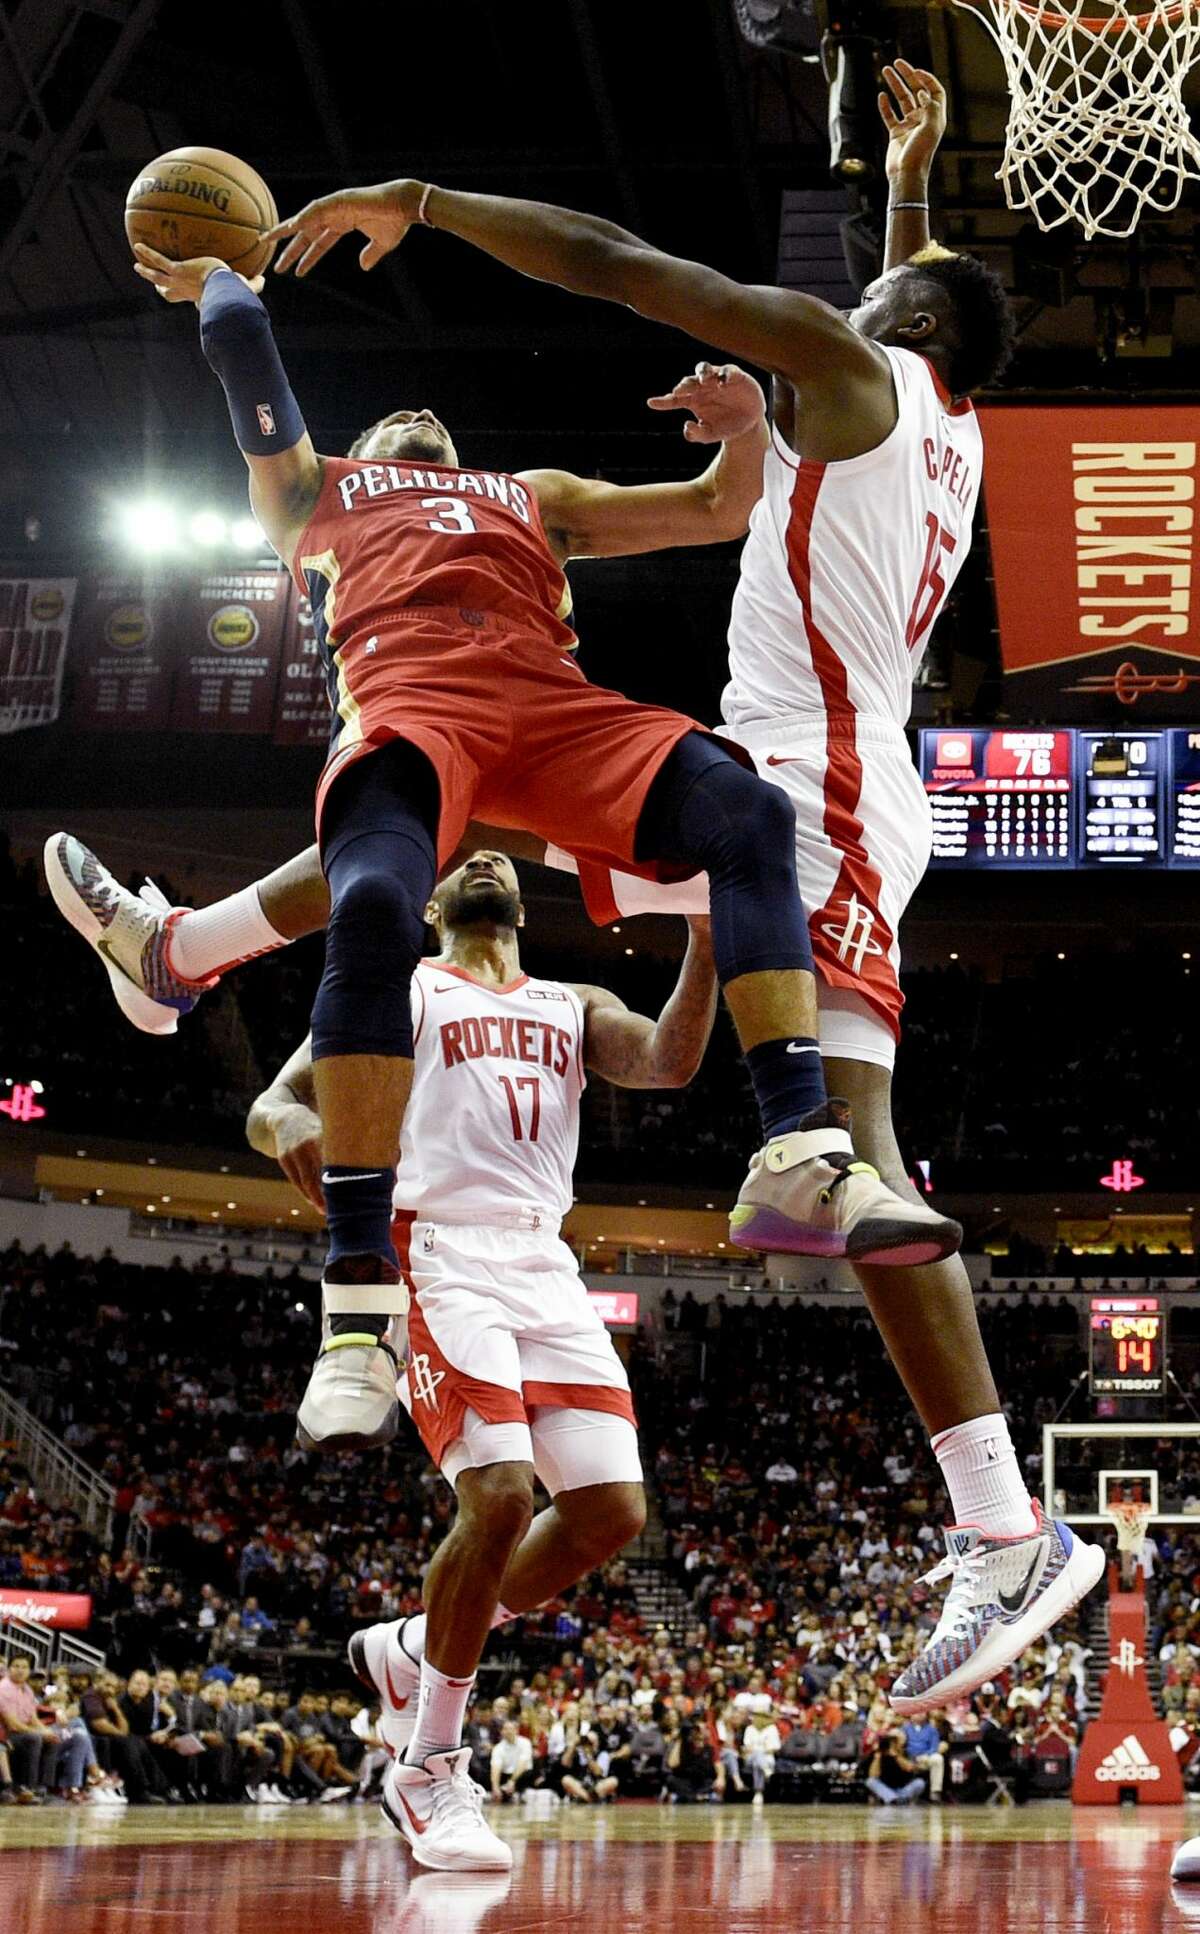 New Orleans Pelicans guard Josh Hart (3) shoots as Houston Rockets center Clint Capela, right, defends during the second half of an NBA basketball game, Saturday, Oct. 26, 2019, in Houston. (AP Photo/Eric Christian Smith)